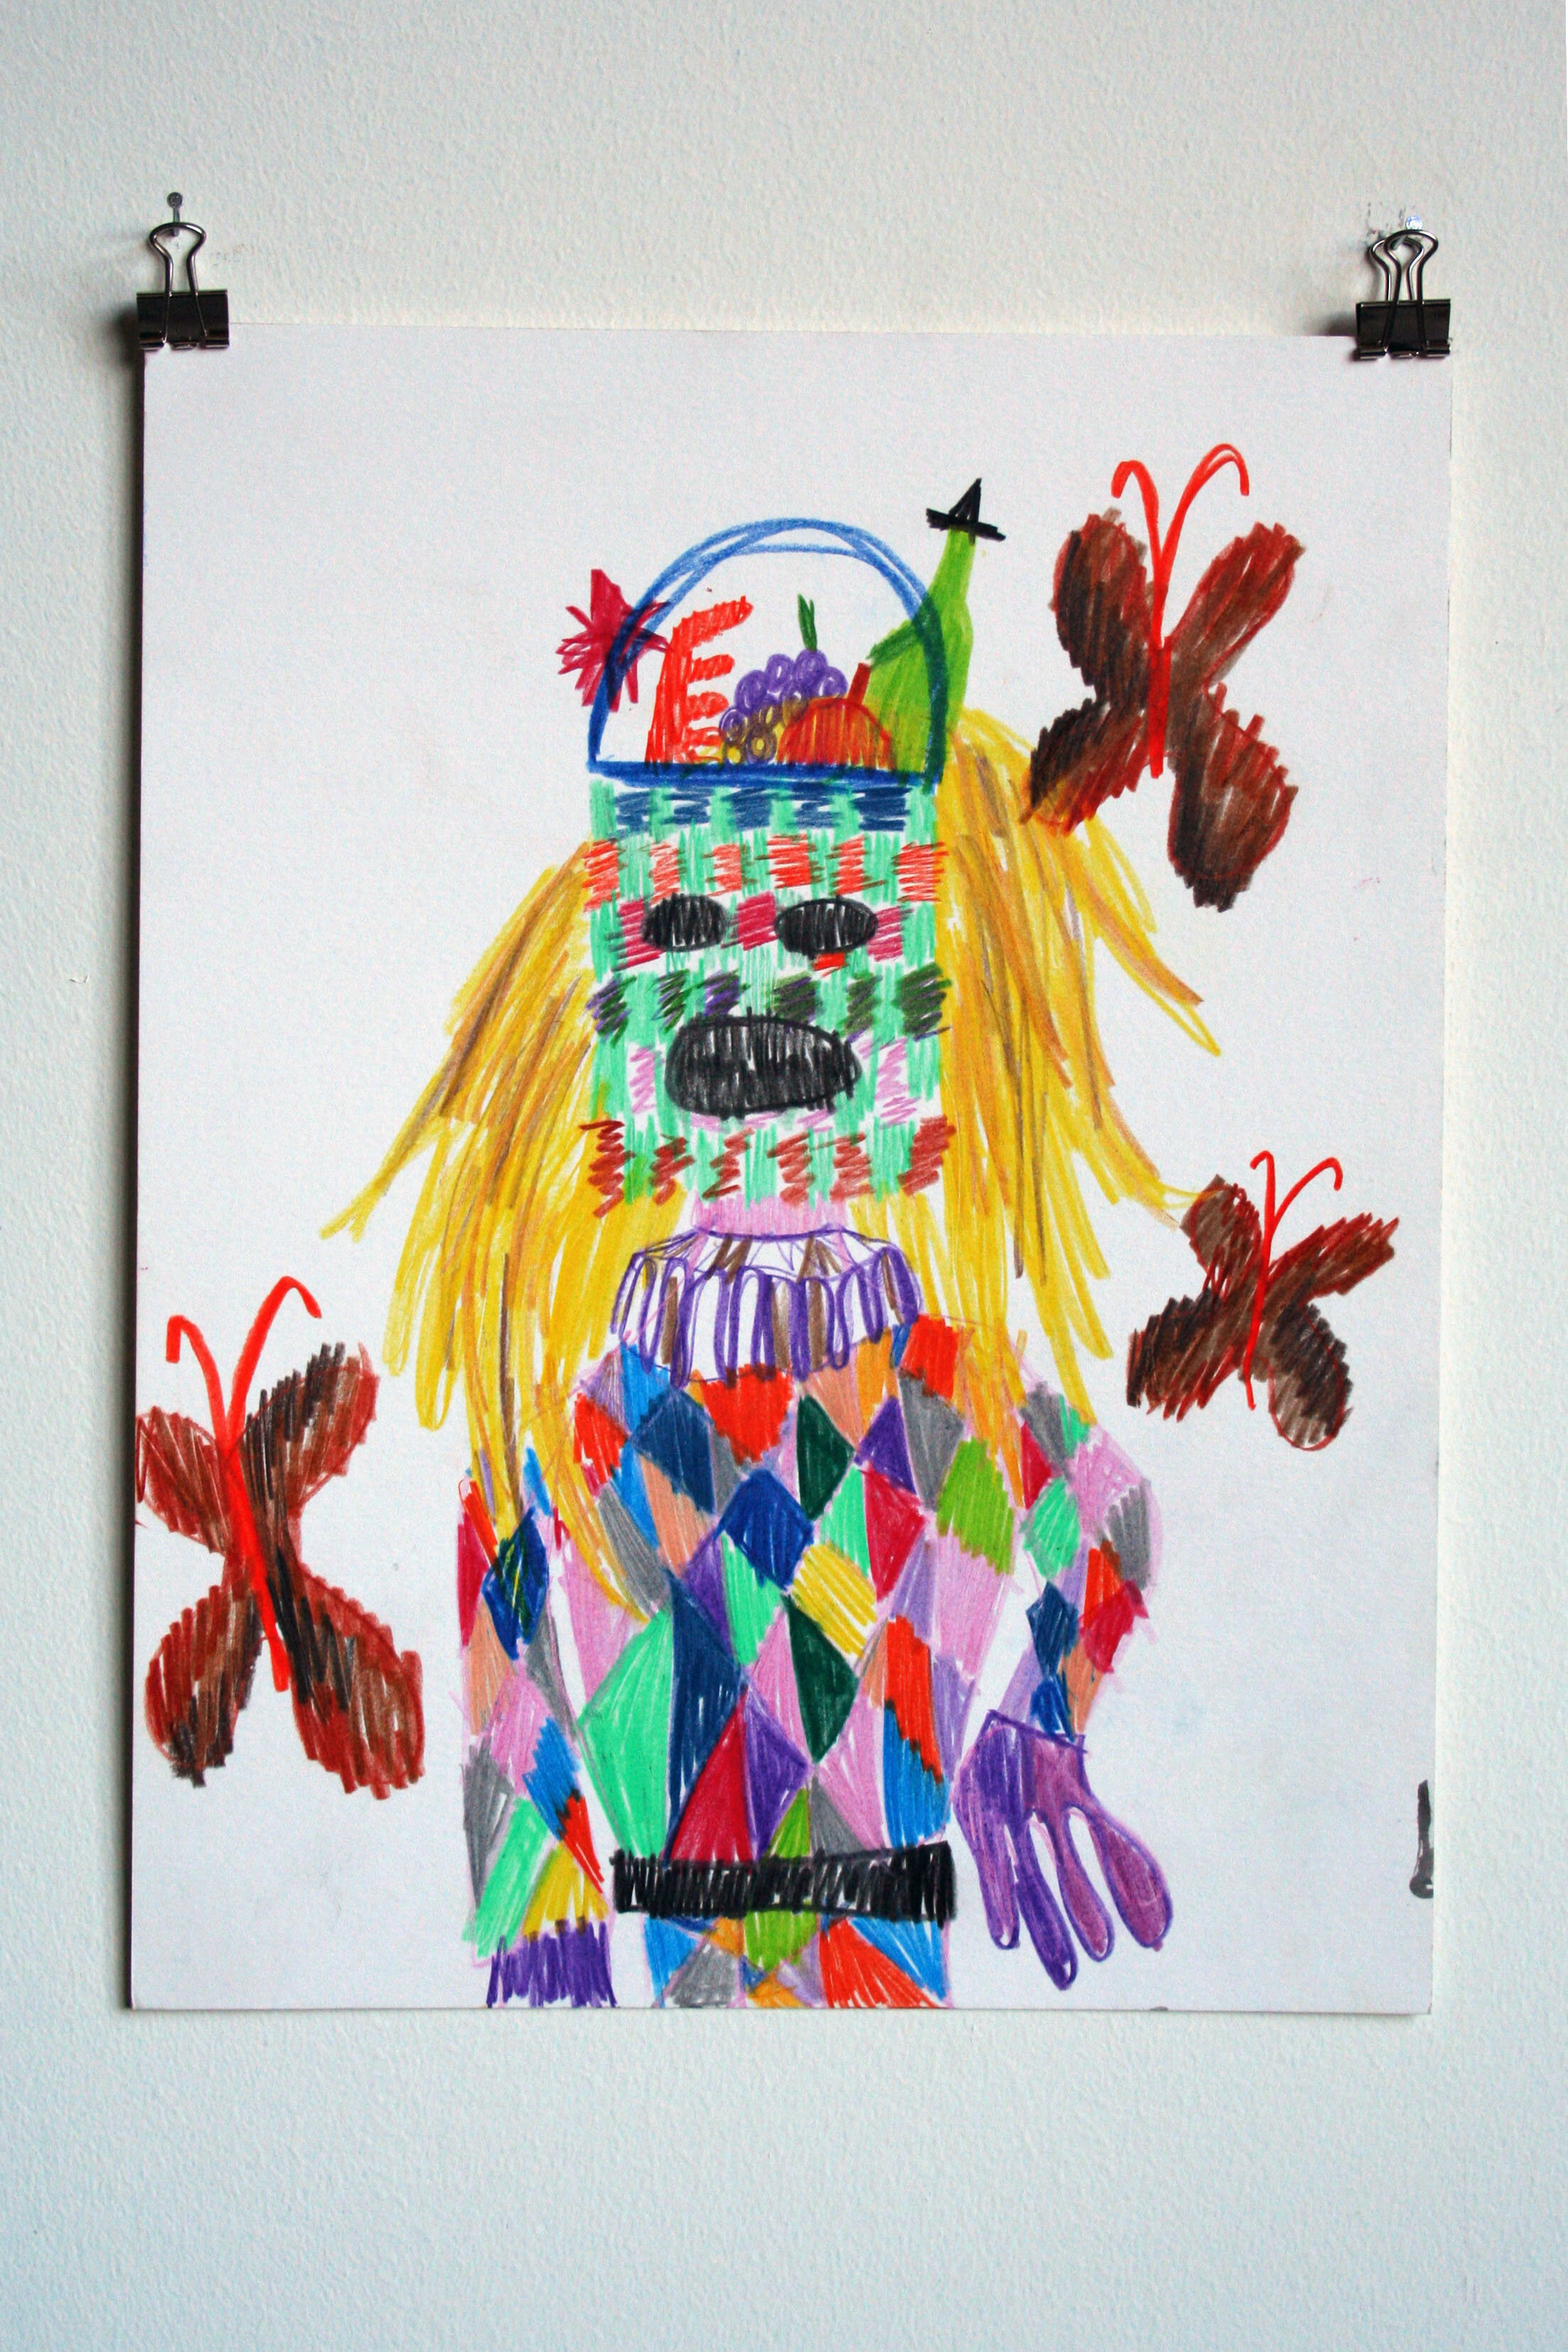   The Blonde Jester Wore a Gift Basket Mask,  2013  11 x 14 inches (27.94 x 35.56 cm.)  colored pencil on paper 